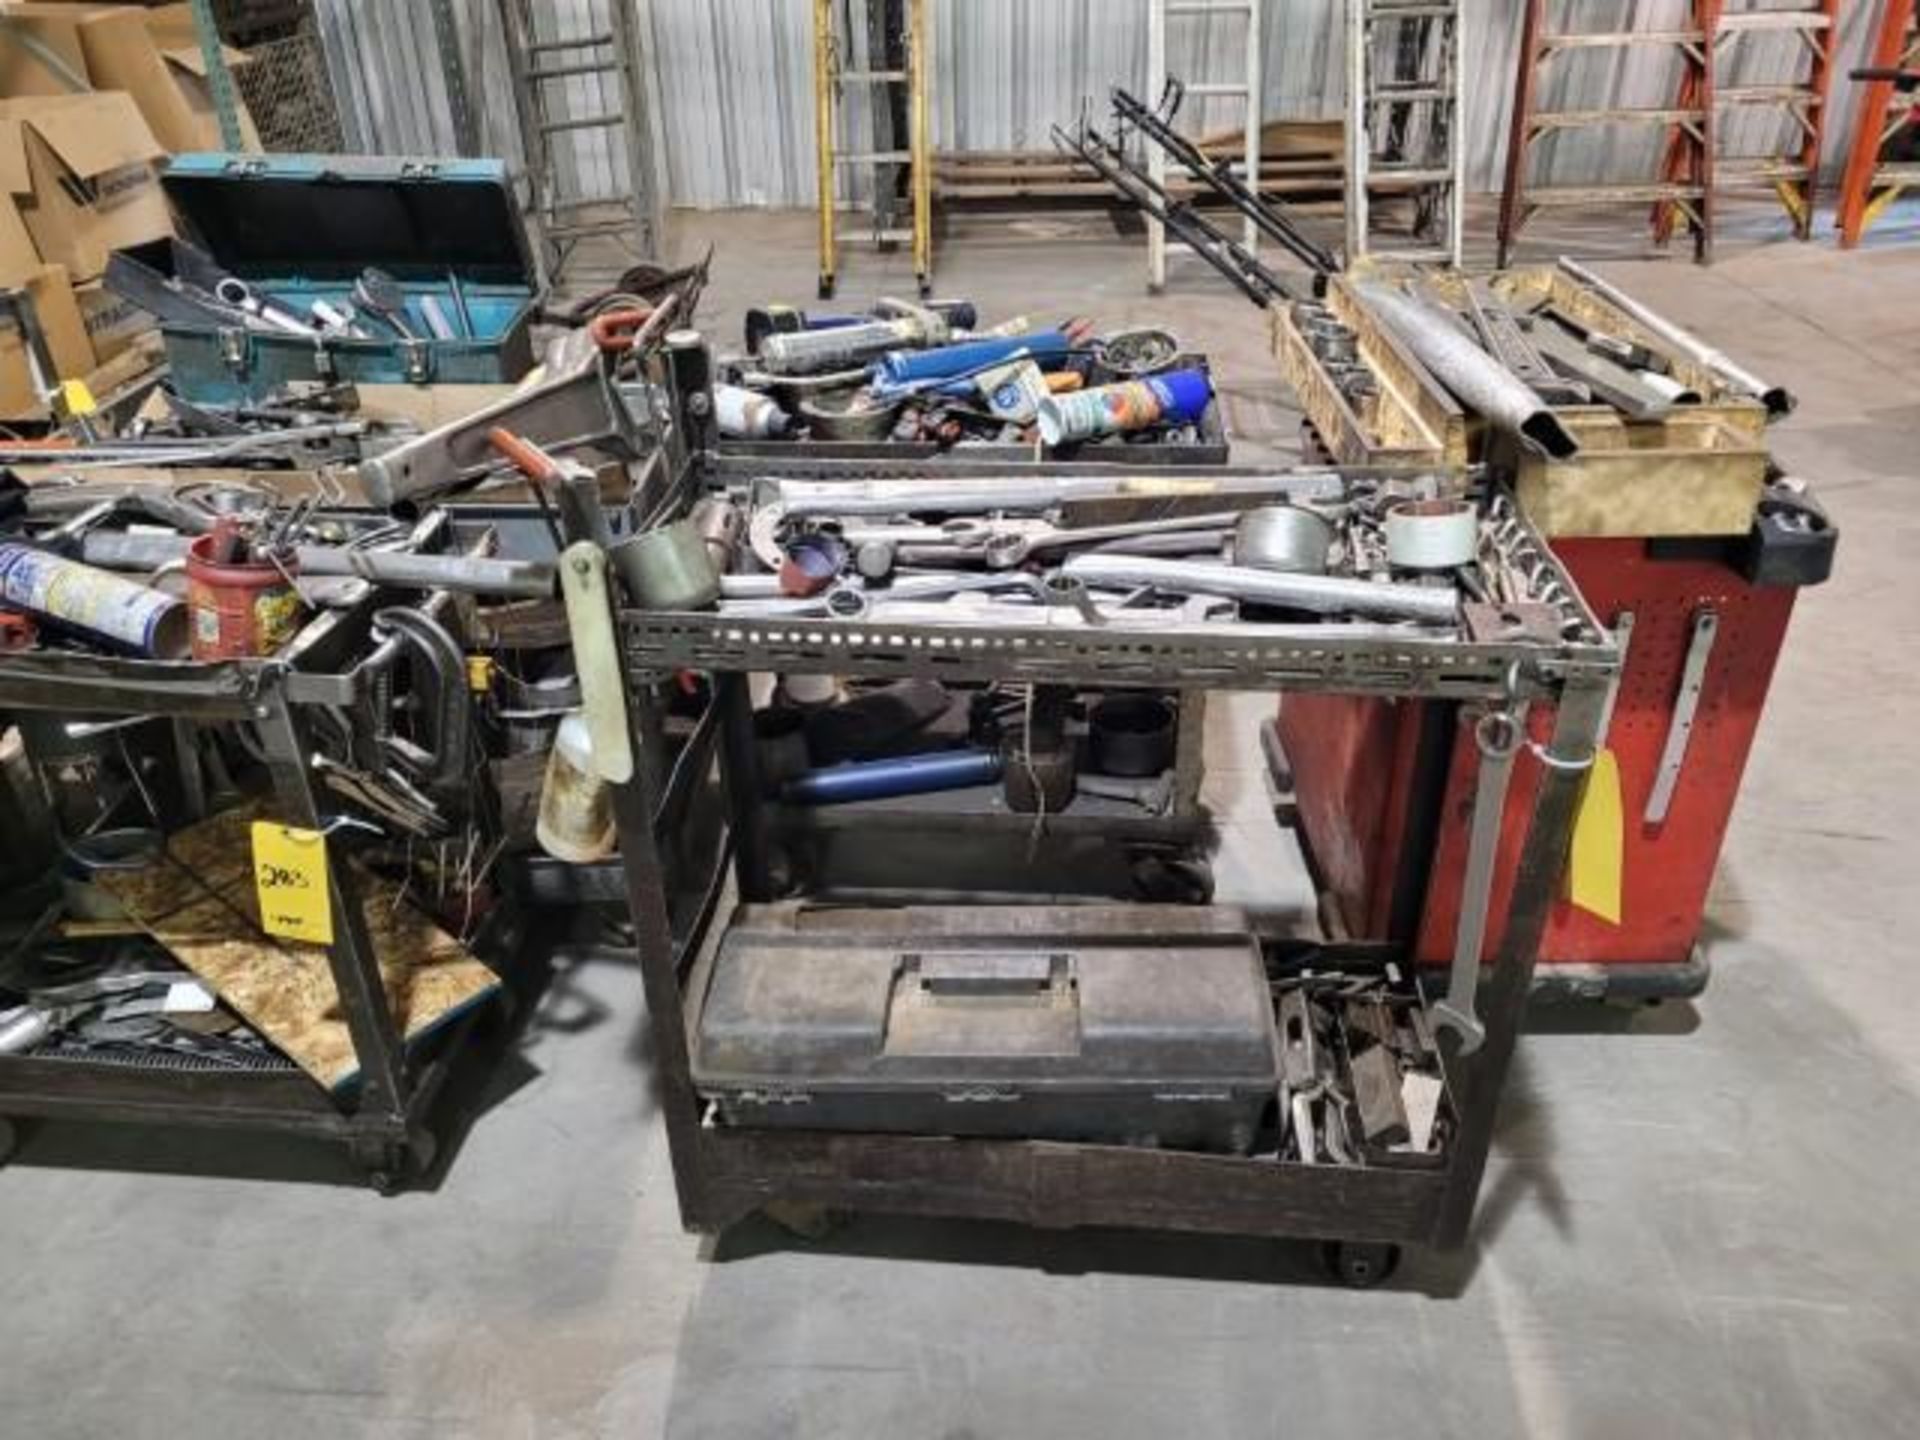 LOT: (6) Utility Carts w/ Hand Tools Consisting of: Sockets, Wrenches, Tool Boxes, Handles, Nuts, Bo - Image 5 of 5